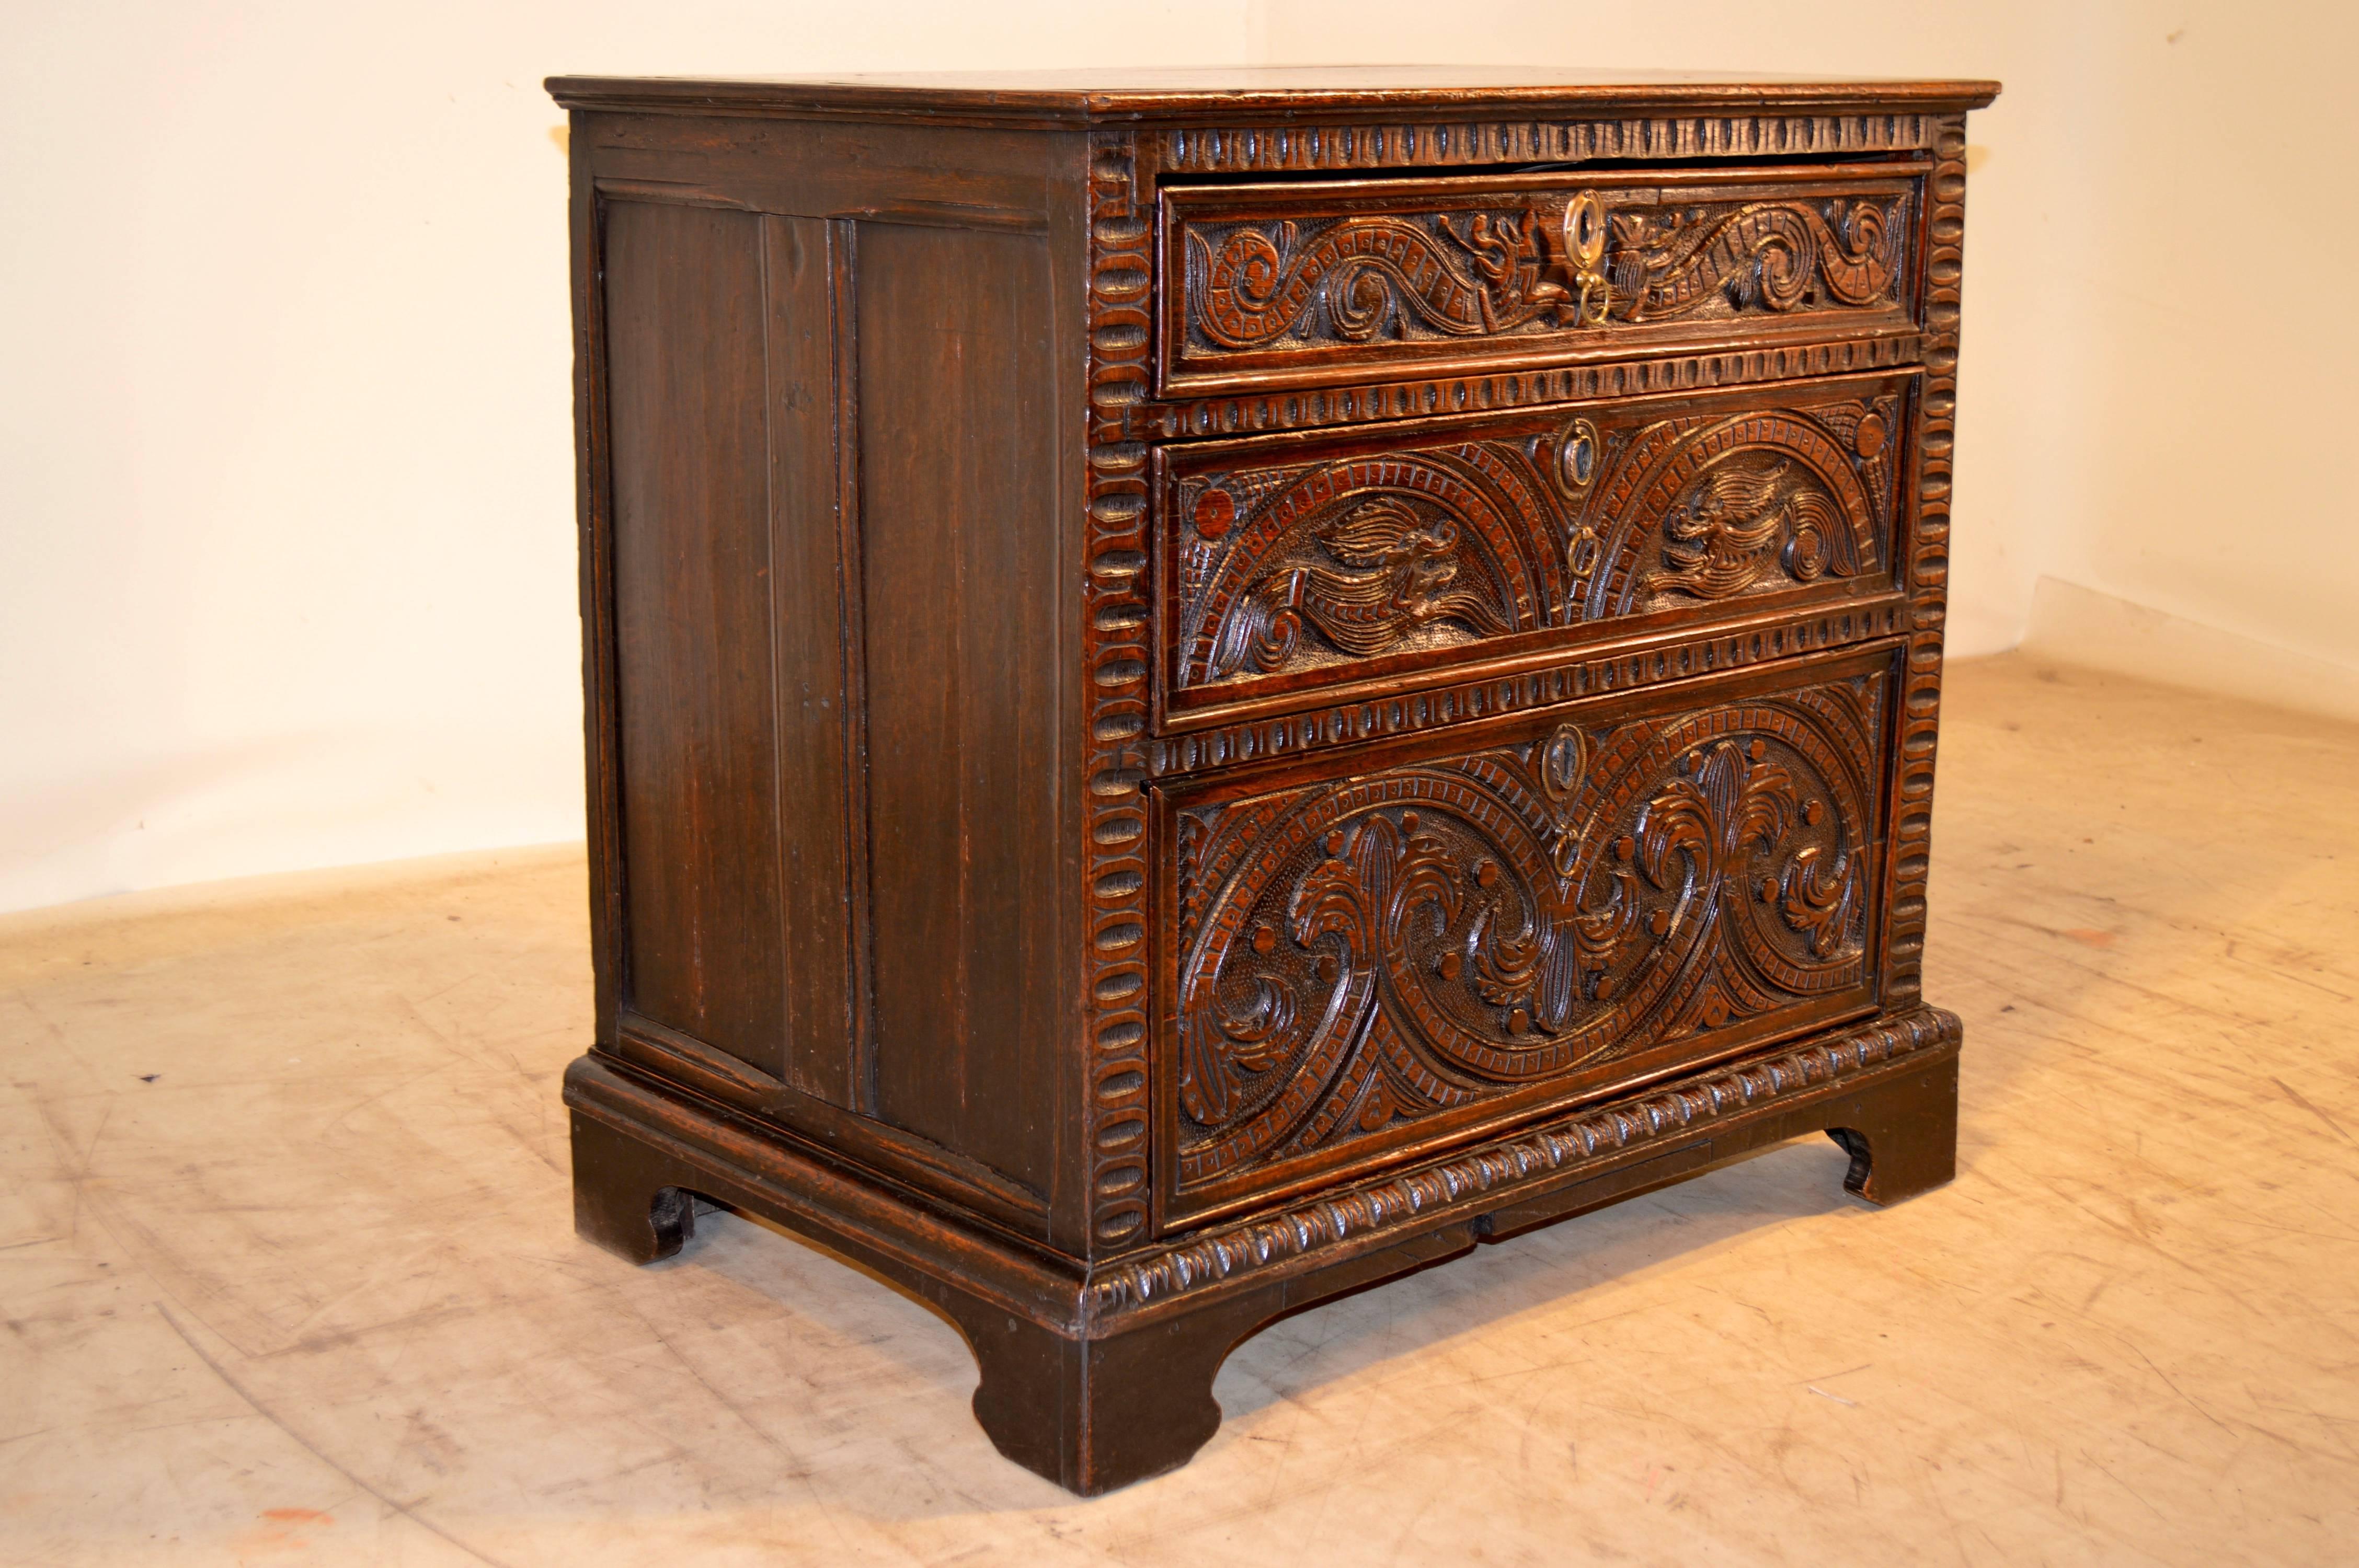 17th century English oak chest with carved decoration, beveled-edge top, hand-paneled sides, and three graduated drawers with carving on the fronts. The case is raised on bracket feet, circa 1650.